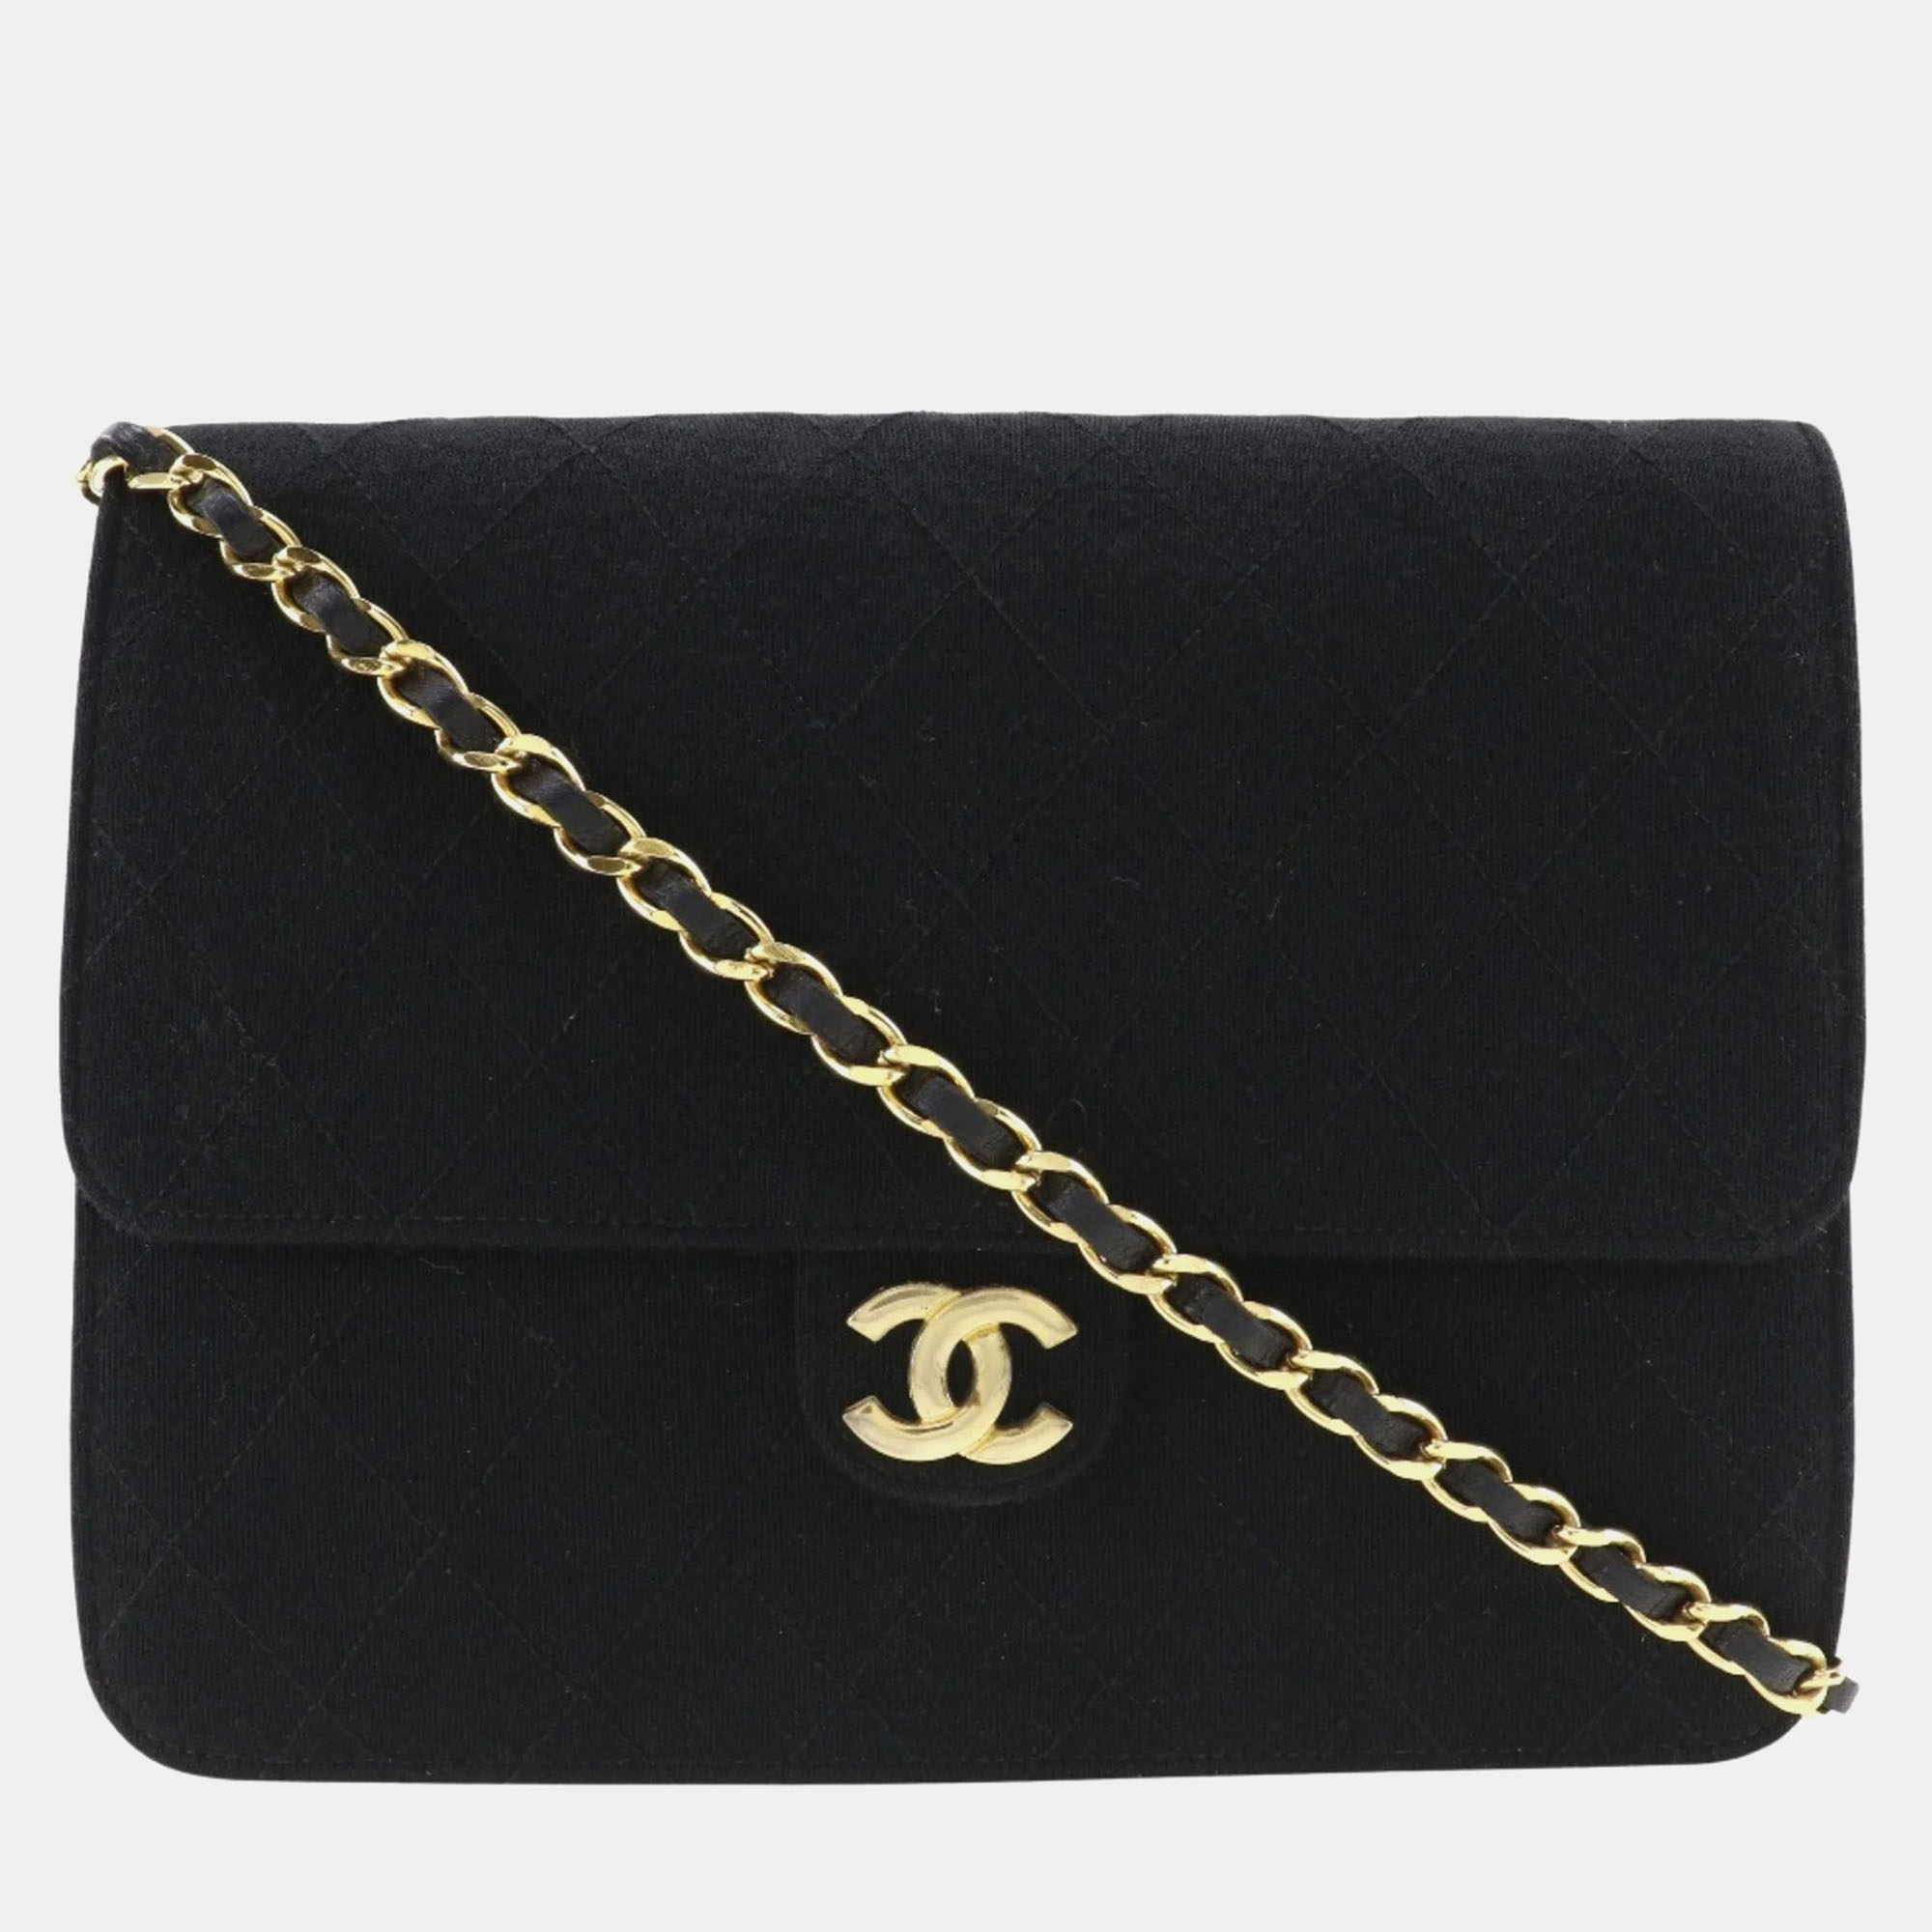 This elegant Chanel shoulder bag is perfect to enhance your everyday style. It is carefully sewn and finished to be a wonderful investment in your closet.